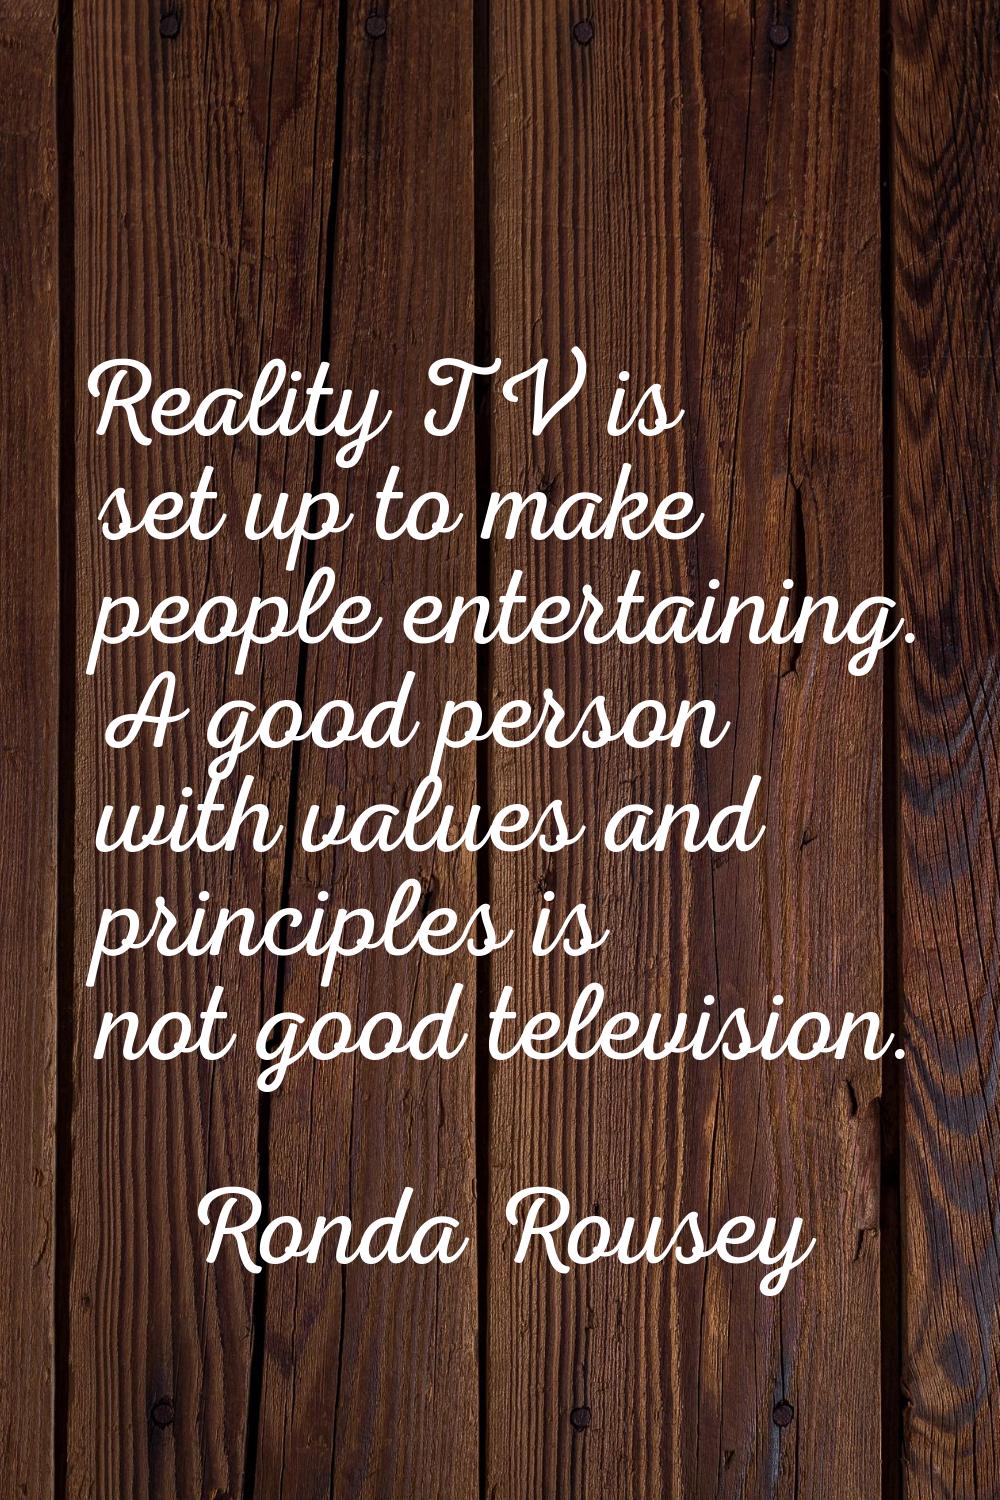 Reality TV is set up to make people entertaining. A good person with values and principles is not g